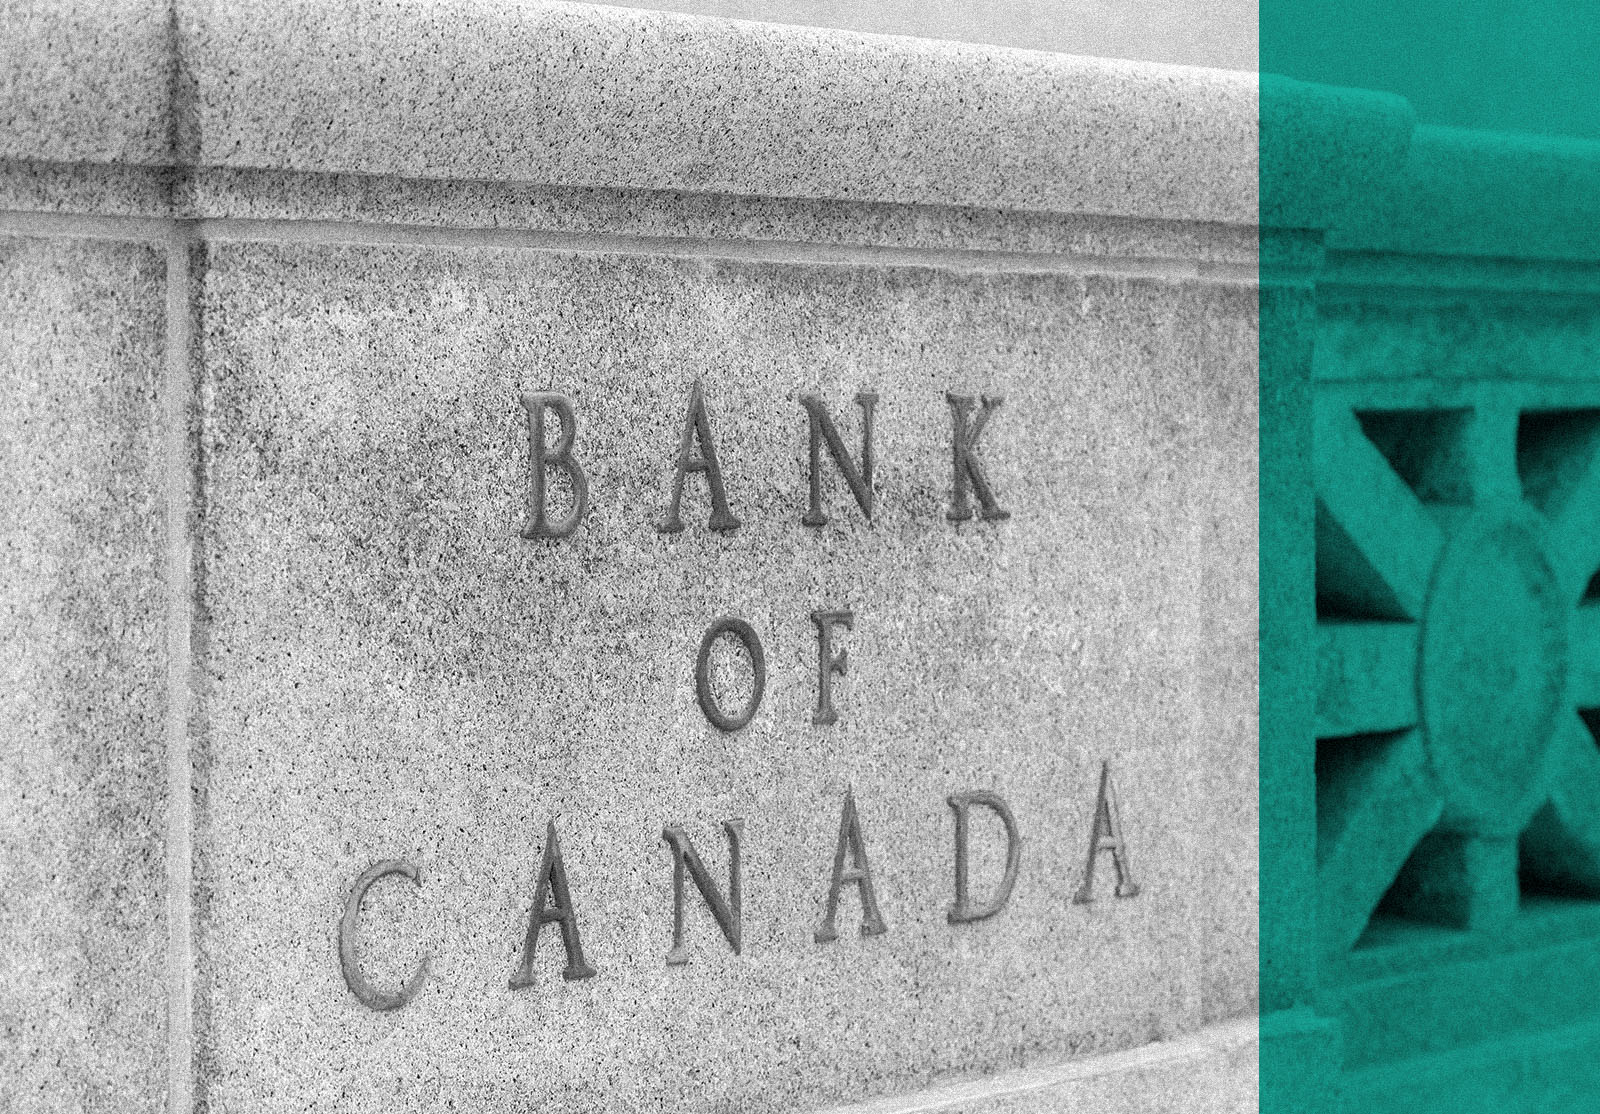 Bank of Canada building sign in downtown